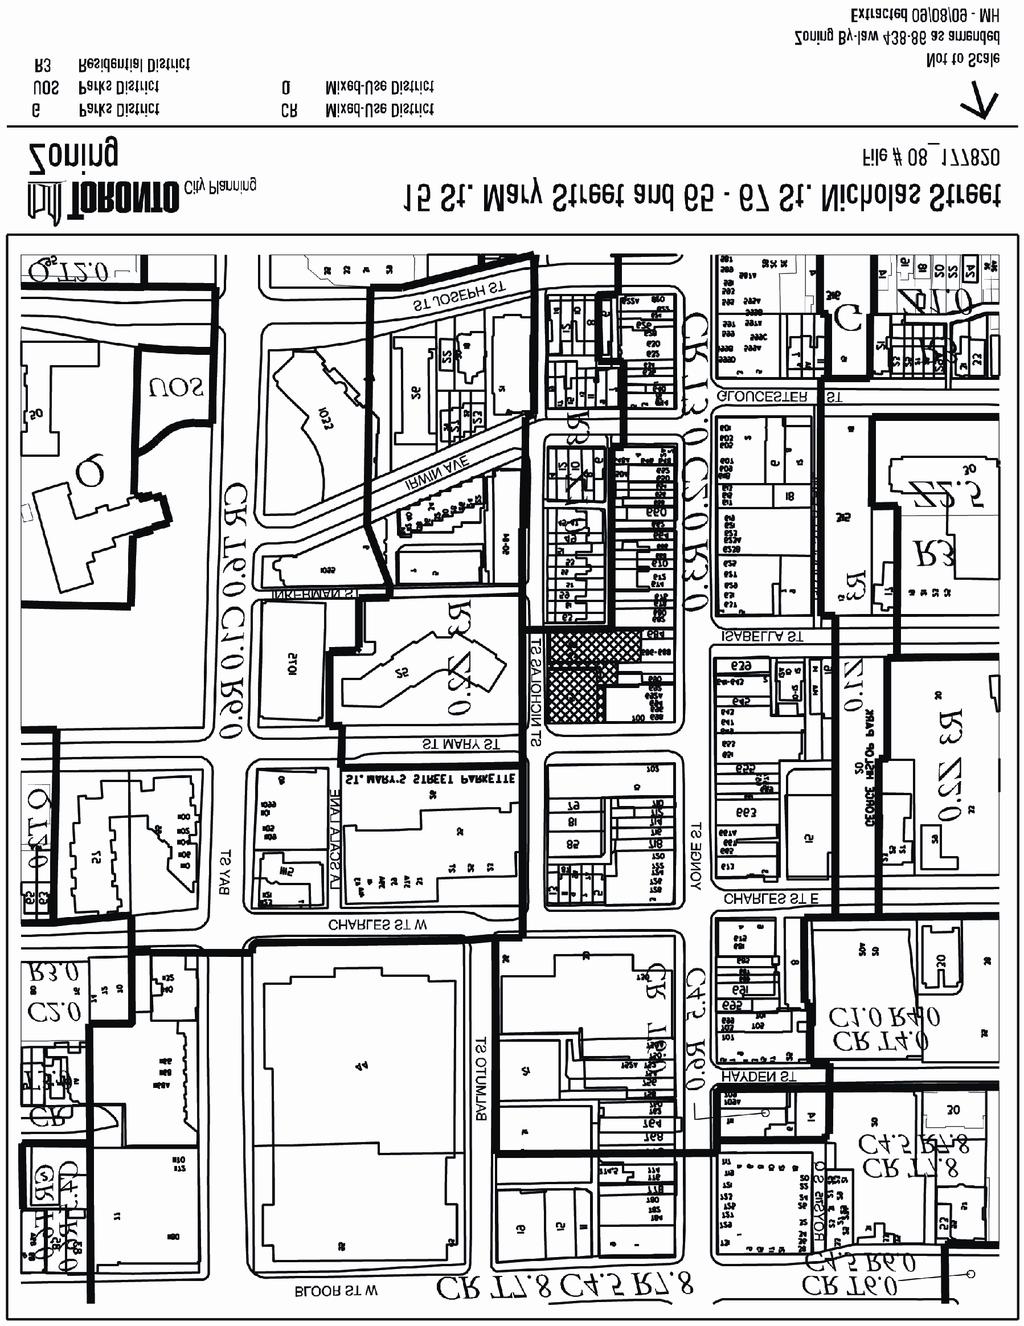 Attachment 5: Zoning Staff report for action Final Report 15